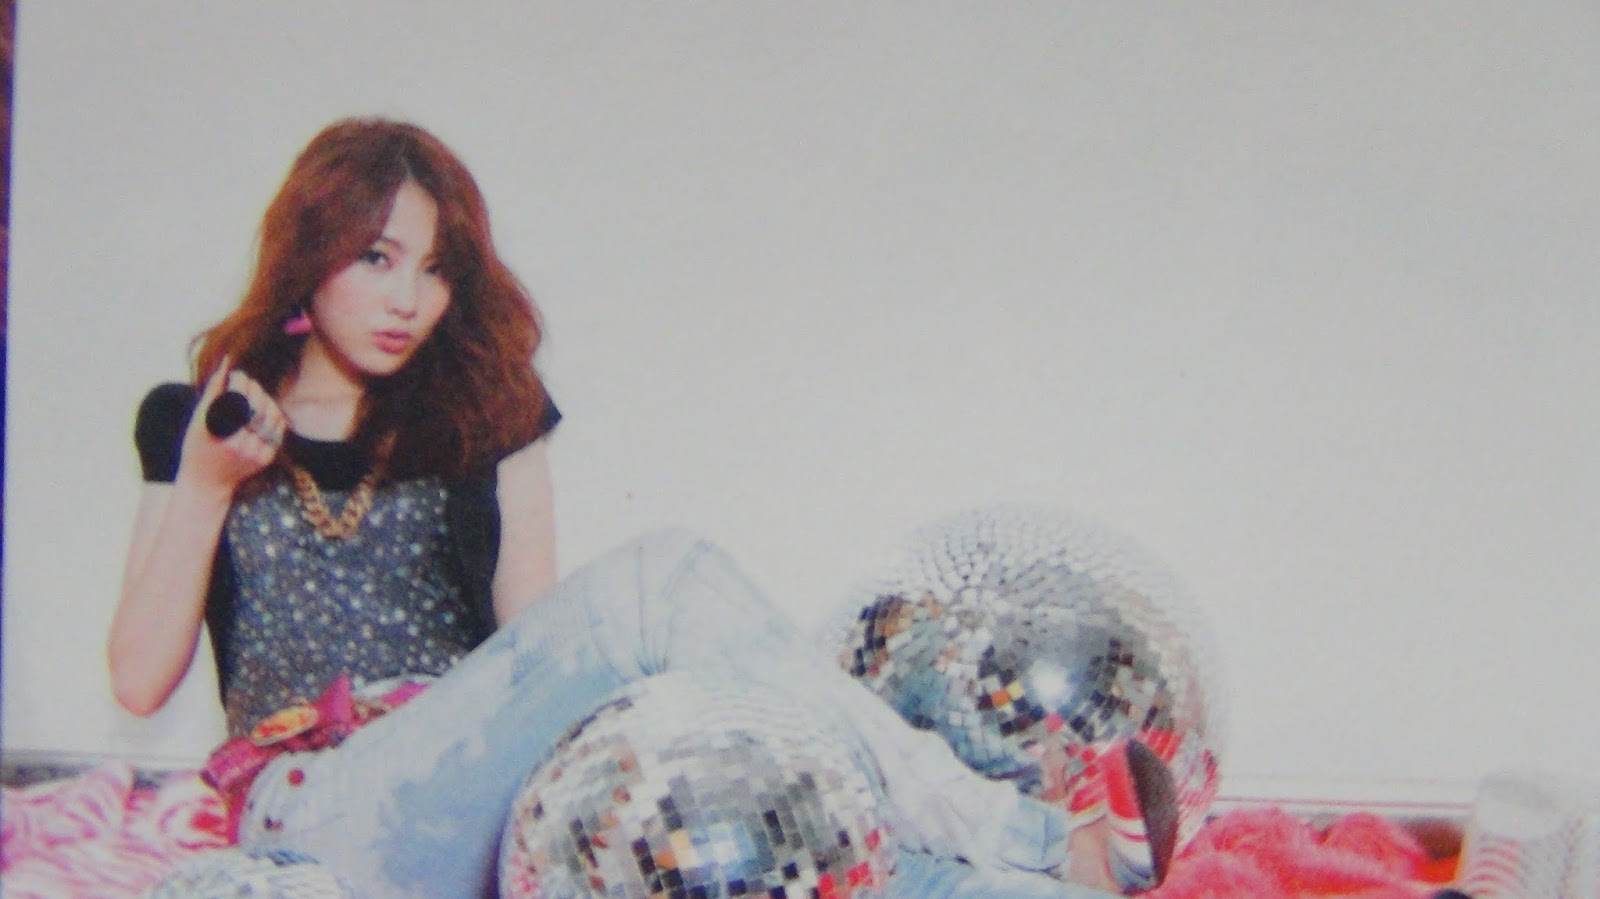 kpop scans: Kara revolution pics from the booklet